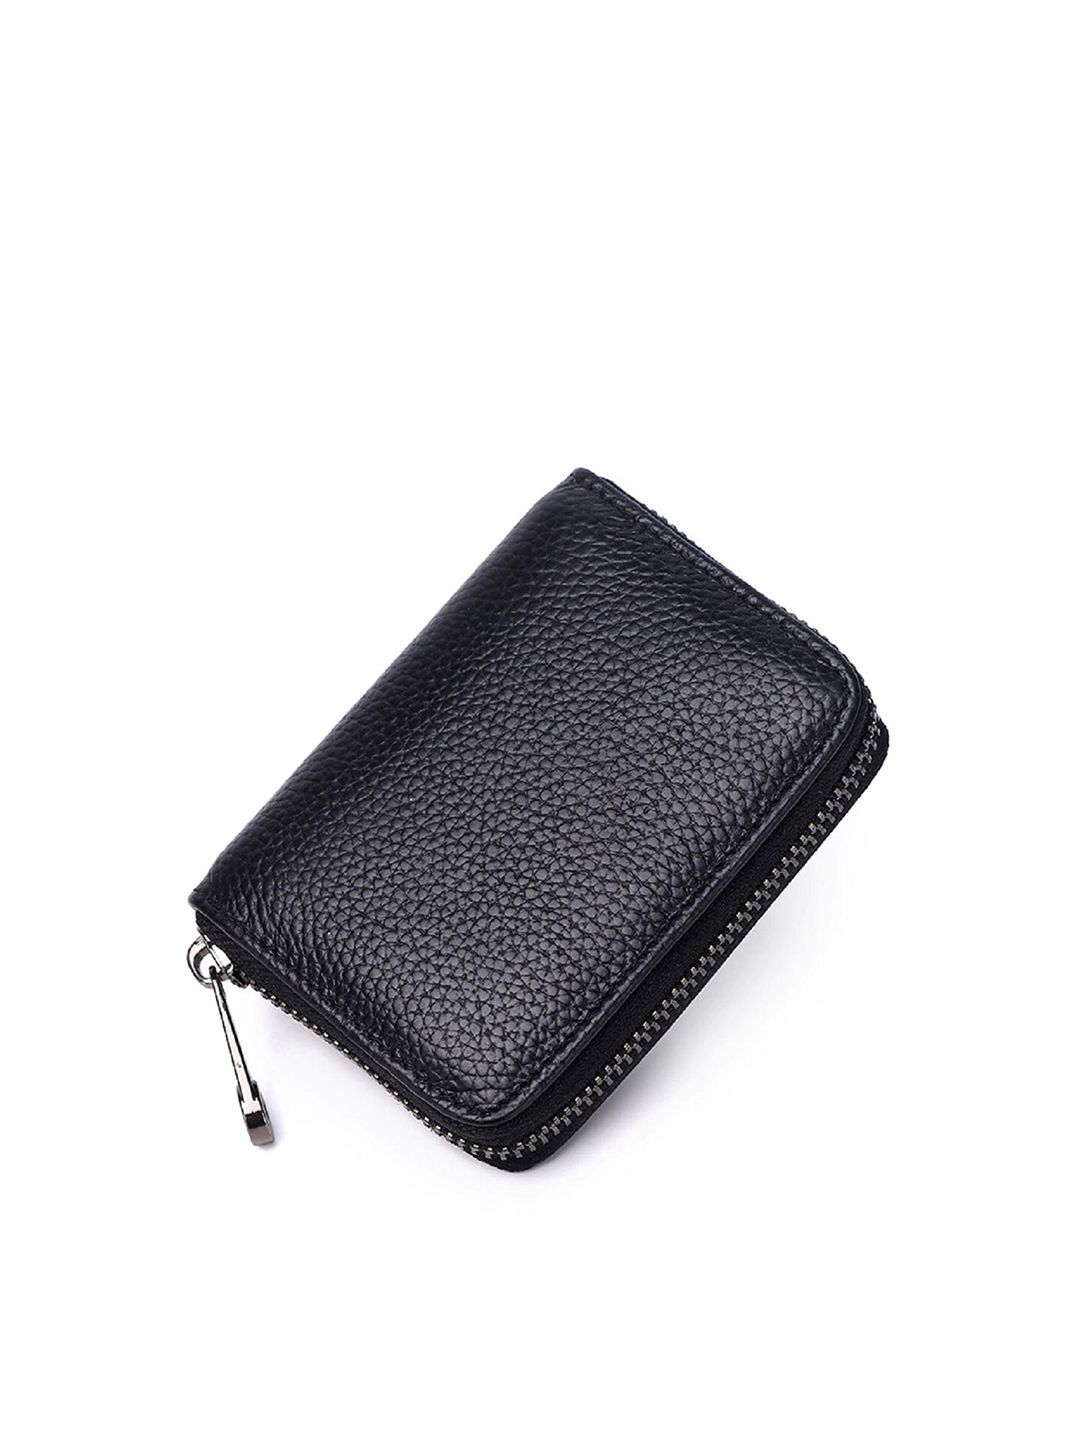 VOGARD Black PU Leather Card Holder Wallet Price in India